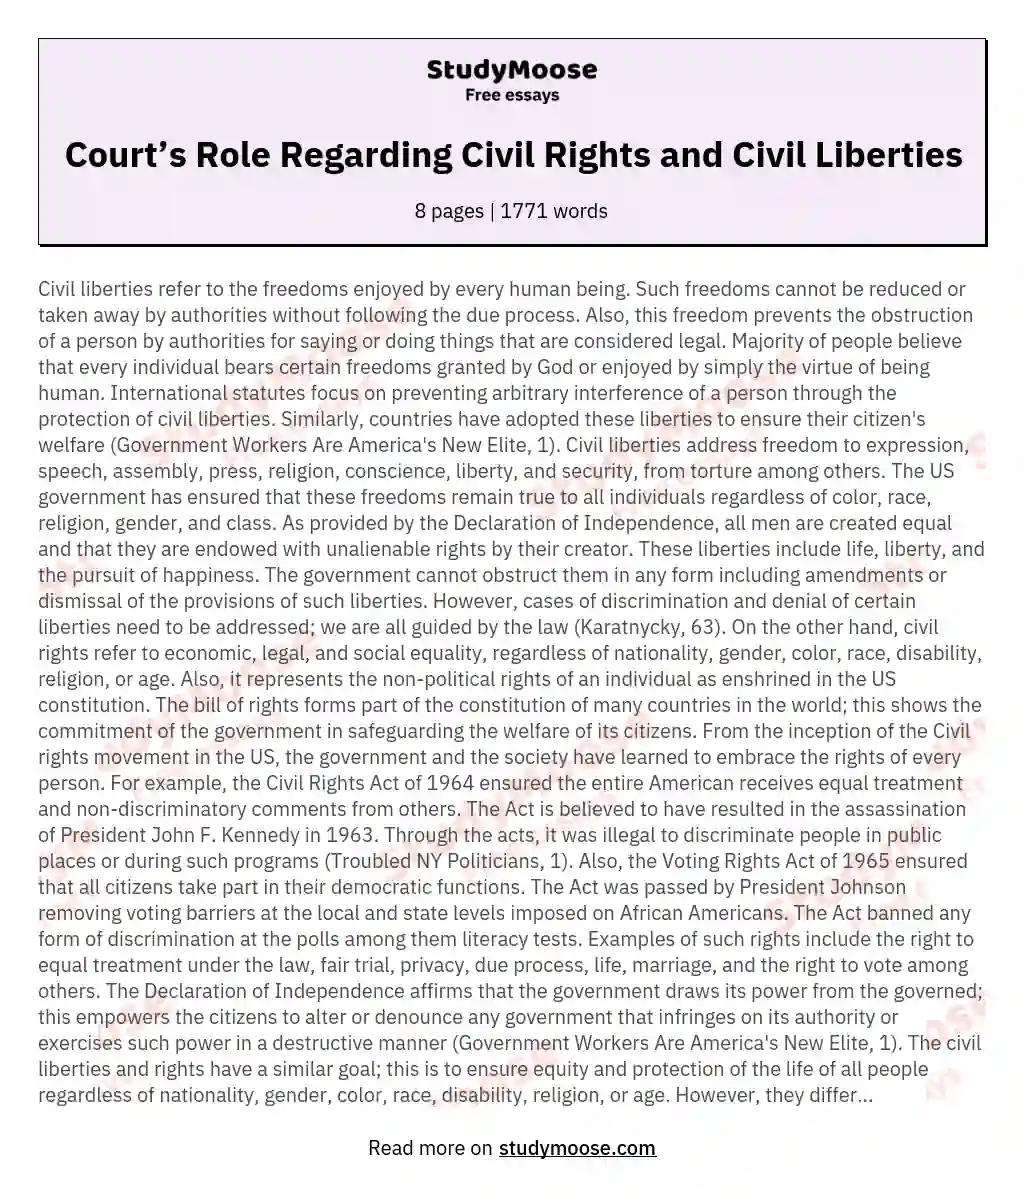 Court’s Role Regarding Civil Rights and Civil Liberties